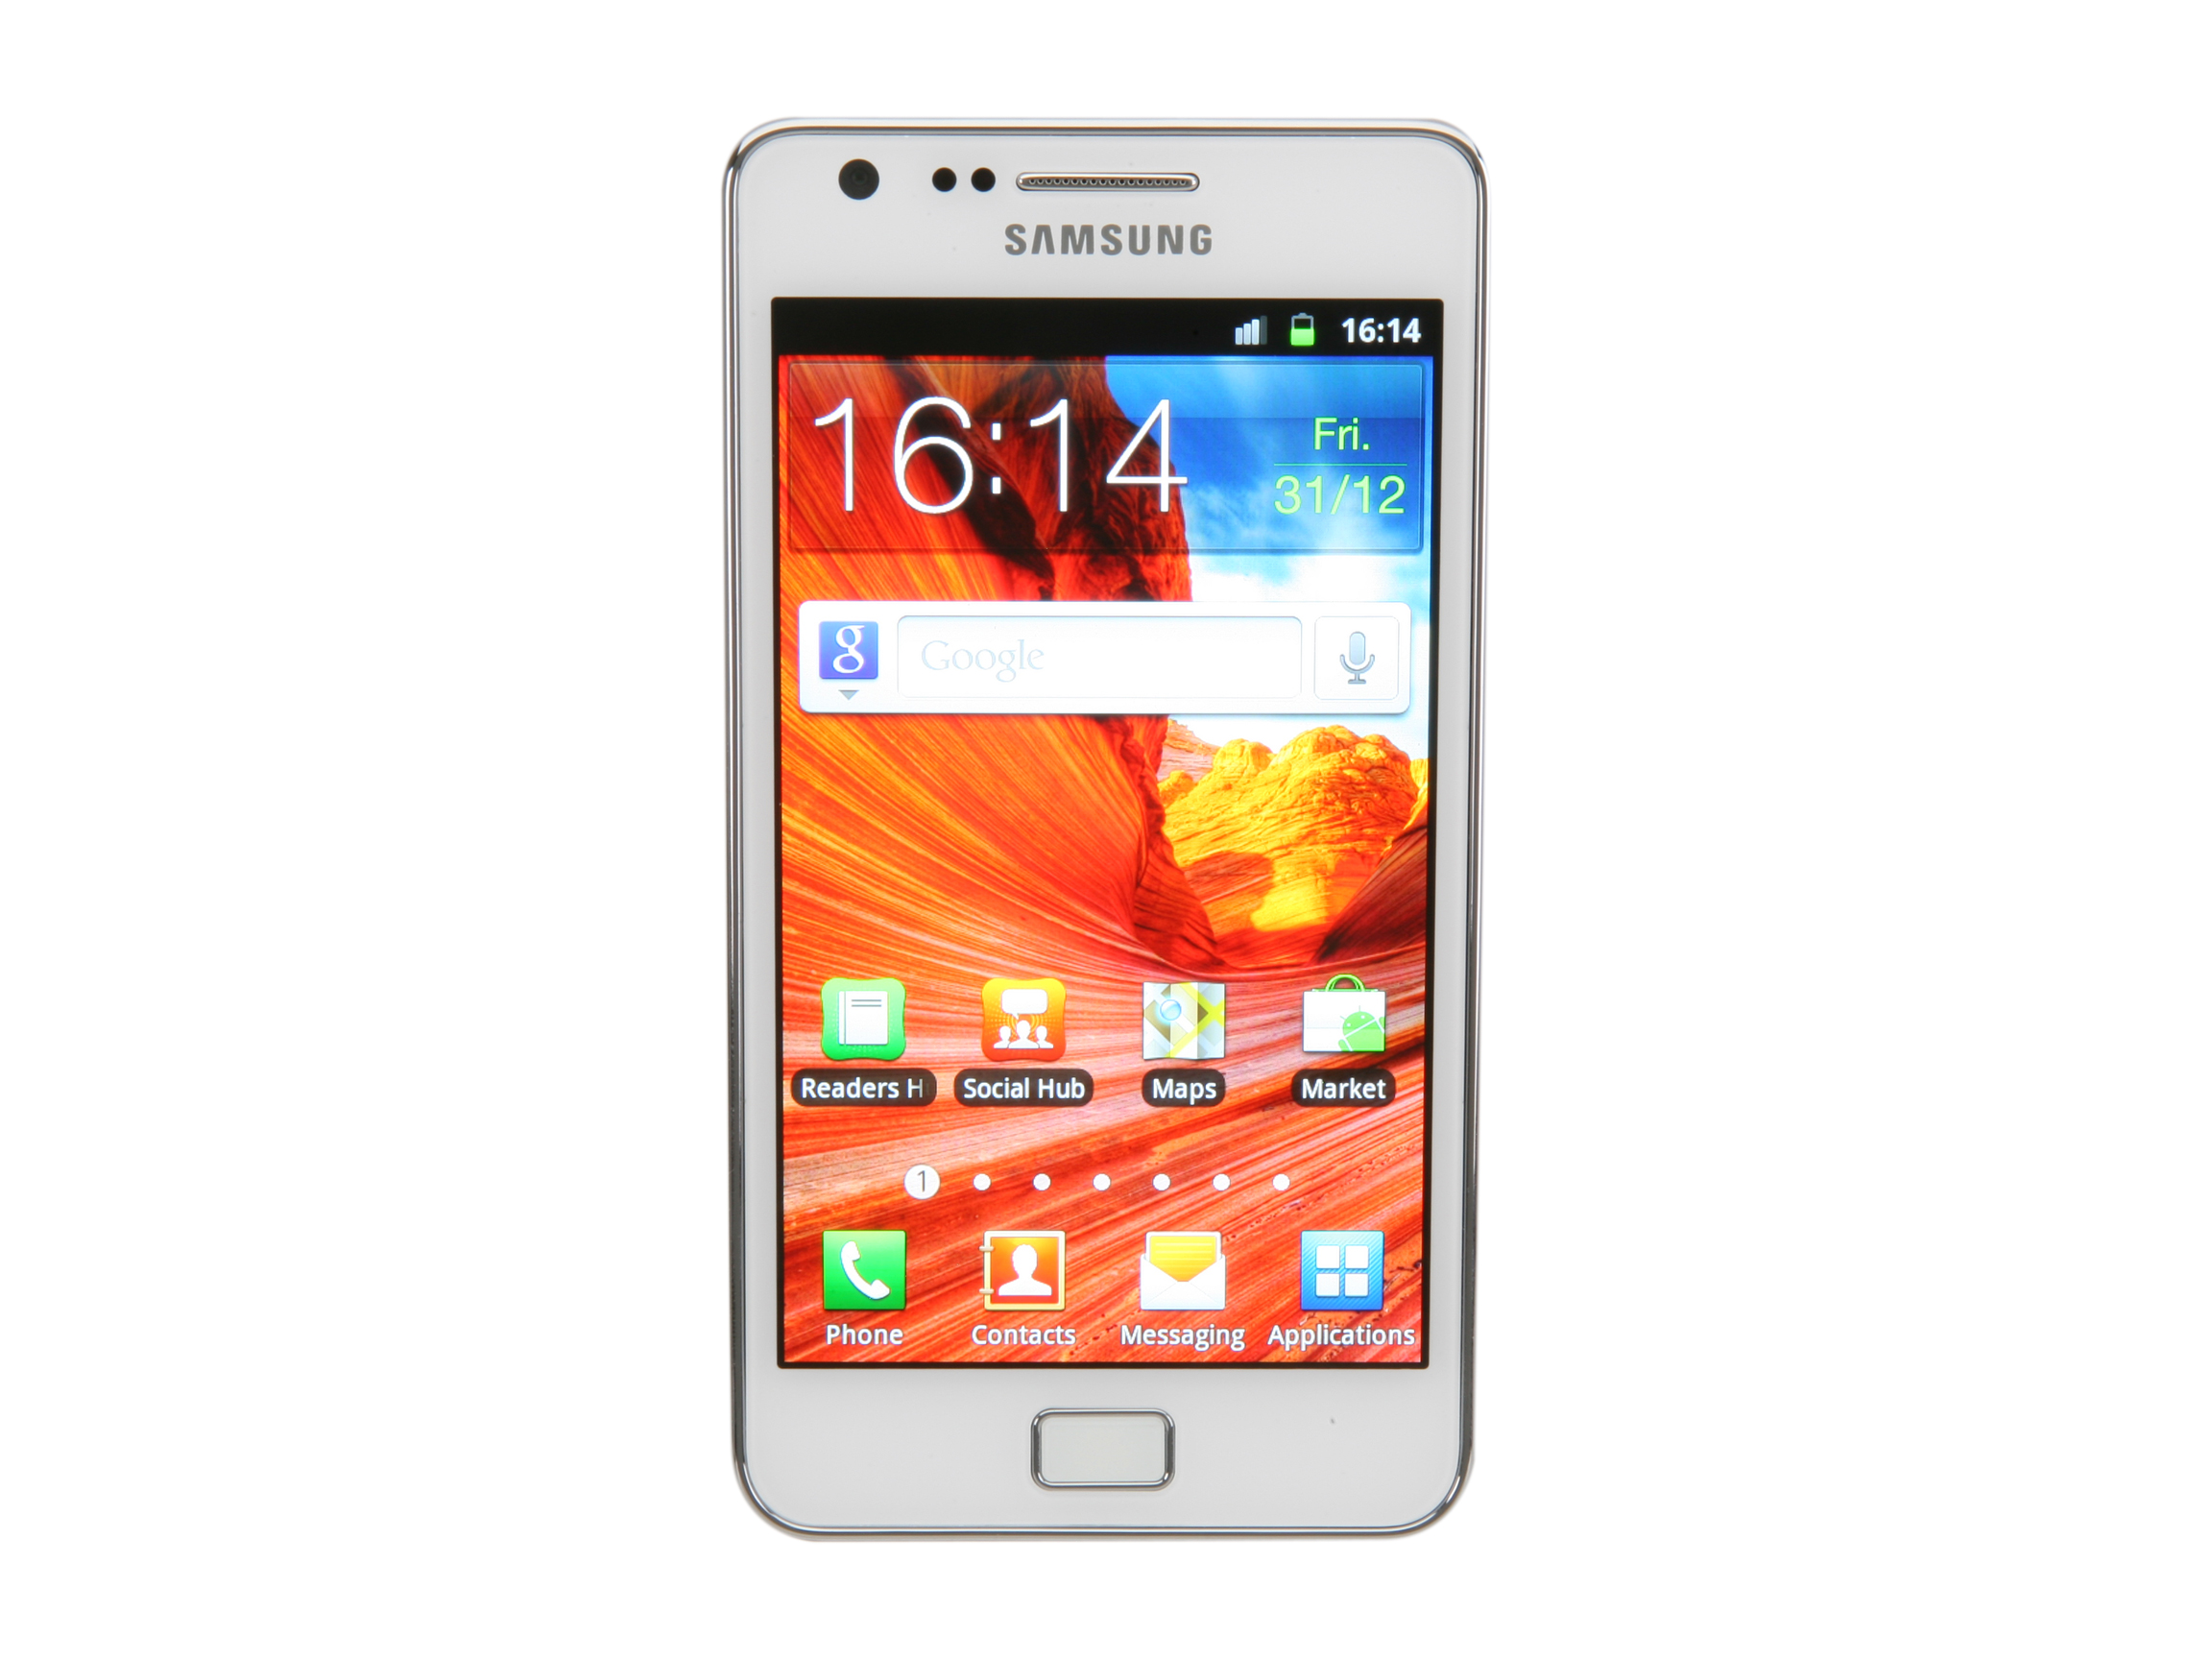 Samsung Galaxy S3 16GB White 3G Unlocked Android GSM Smart Phone with S Voice / Smart Stay / Direct Call (i9300) 